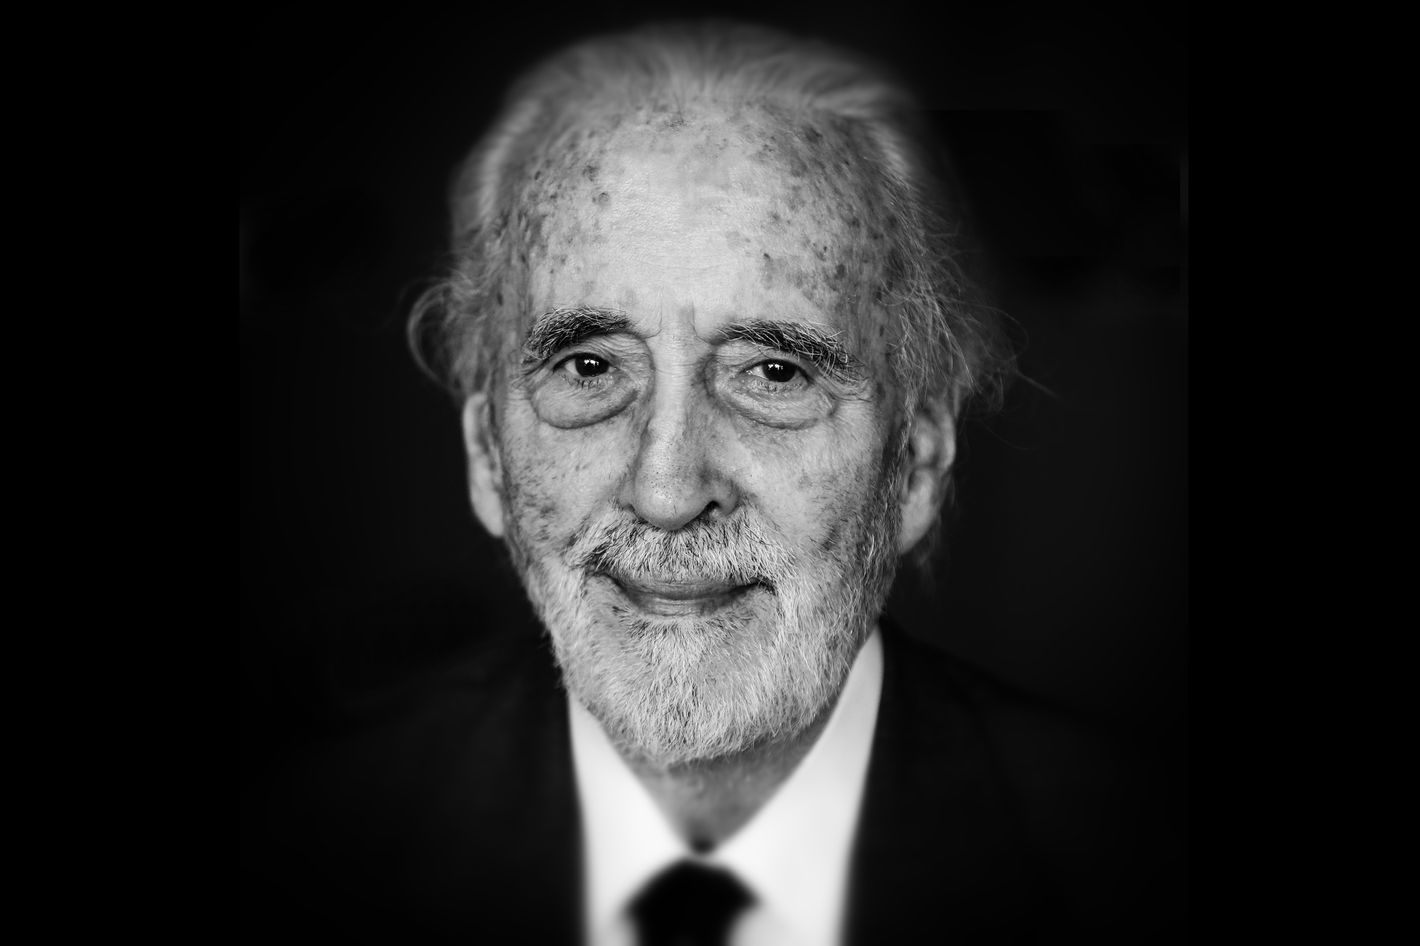 An absolute pleasure of listening to the legendary Sir Christopher Lee